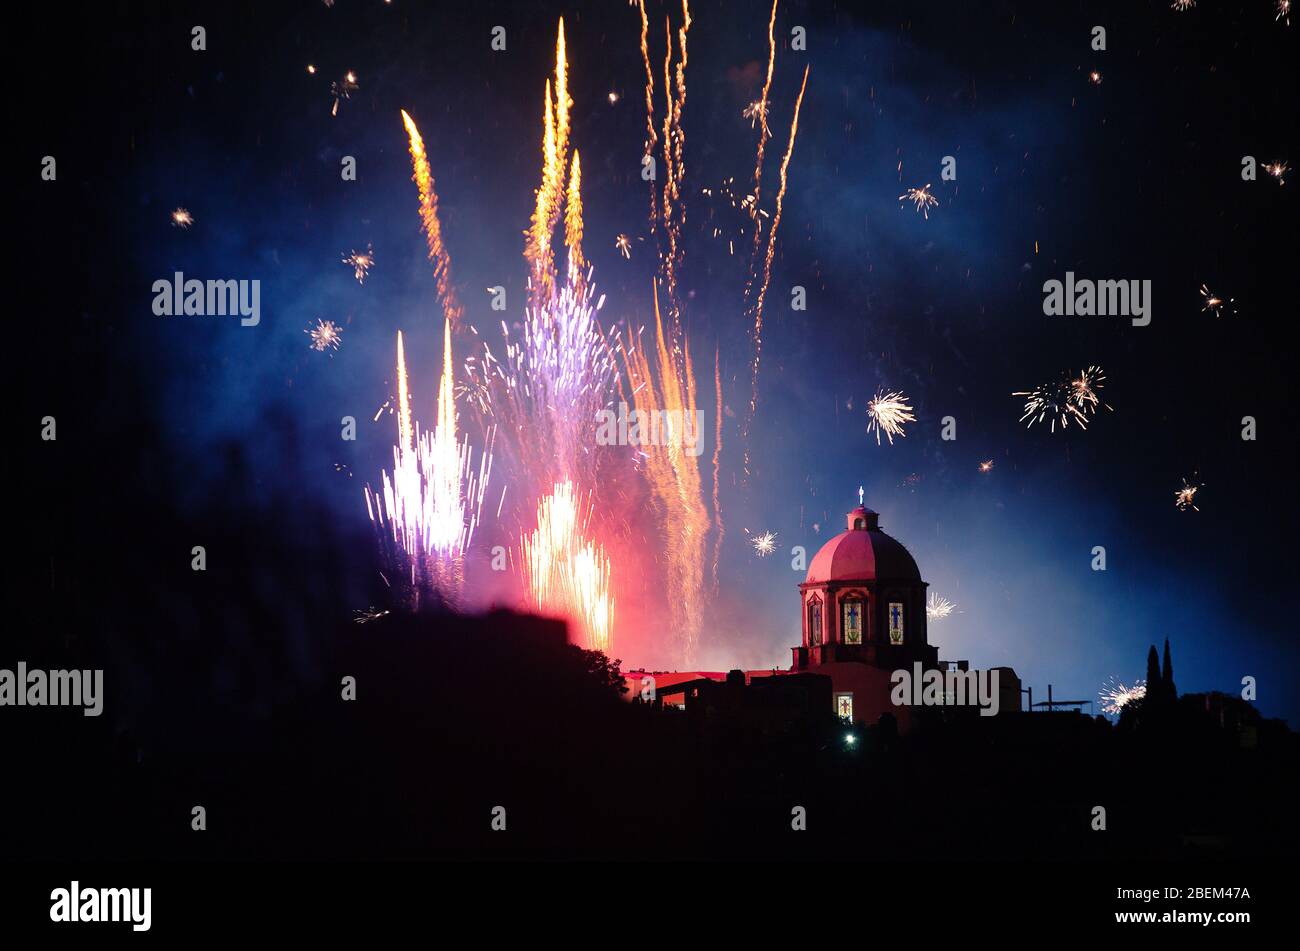 Fireworks erupt over a church in San Miguel de Allende, Mexico, for celebrations around Dia De Los Locos, or the 'Day of the Crazies' festival. Stock Photo